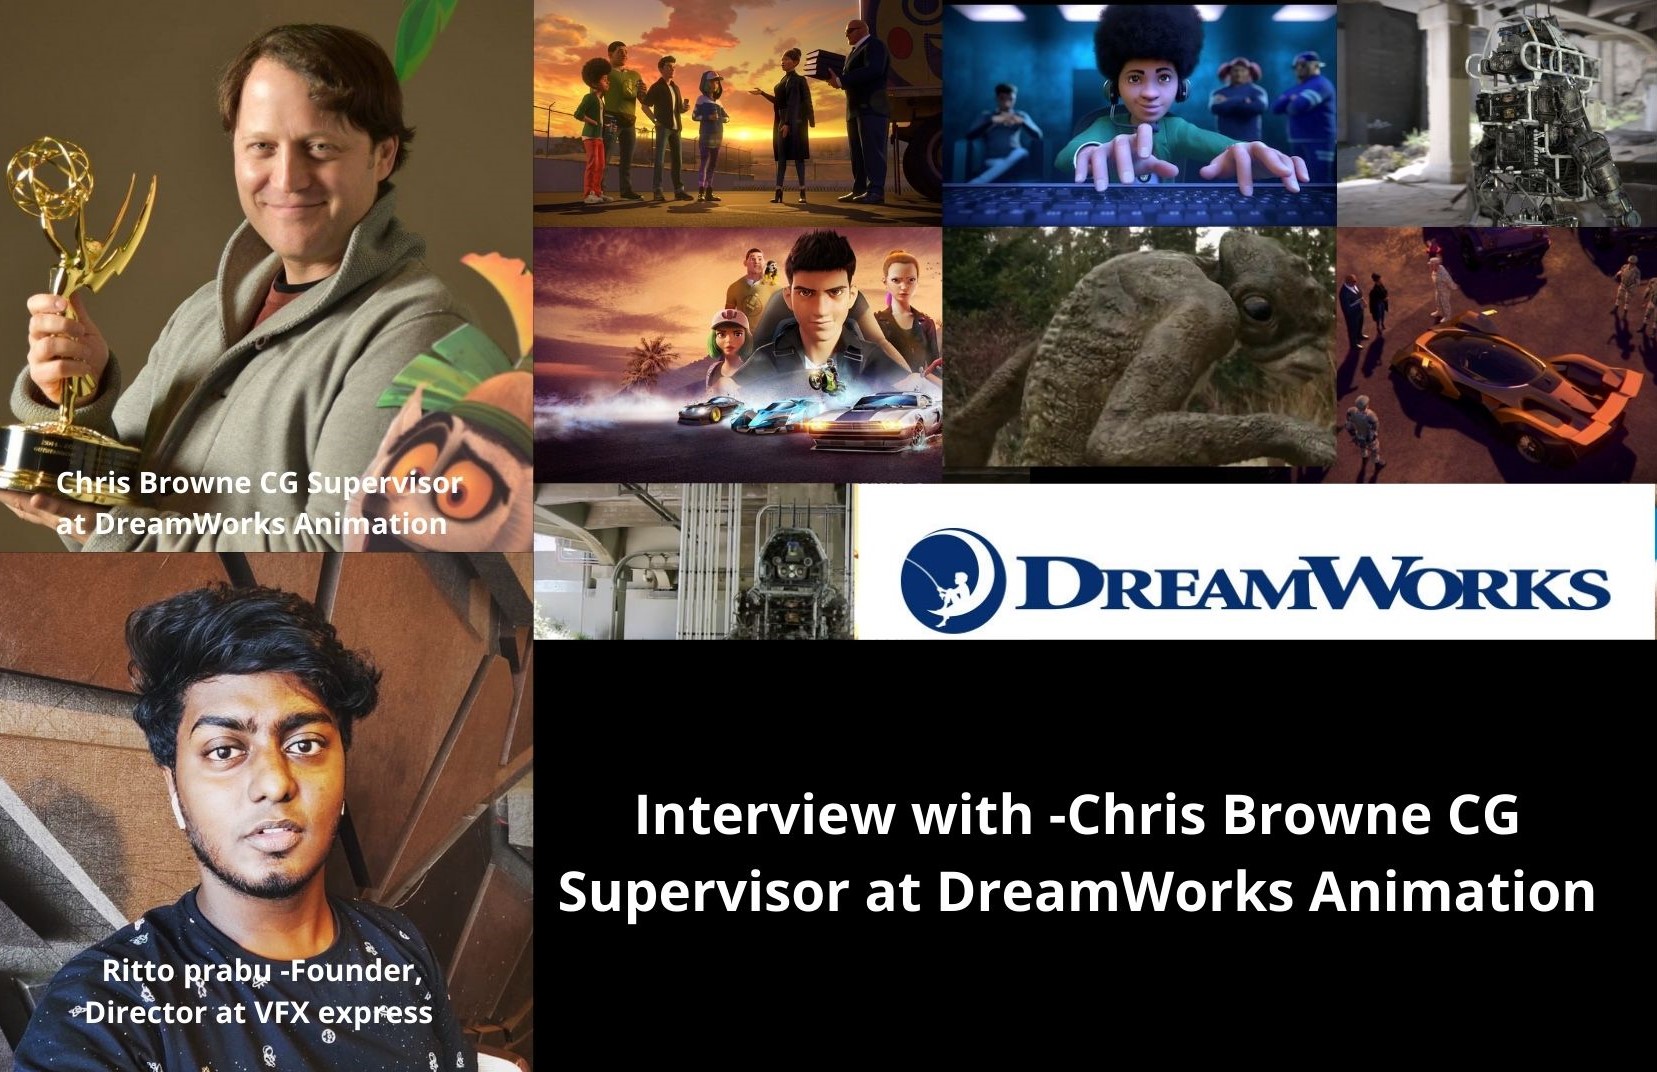 Interview with -Chris Browne CG Supervisor at DreamWorks Animation